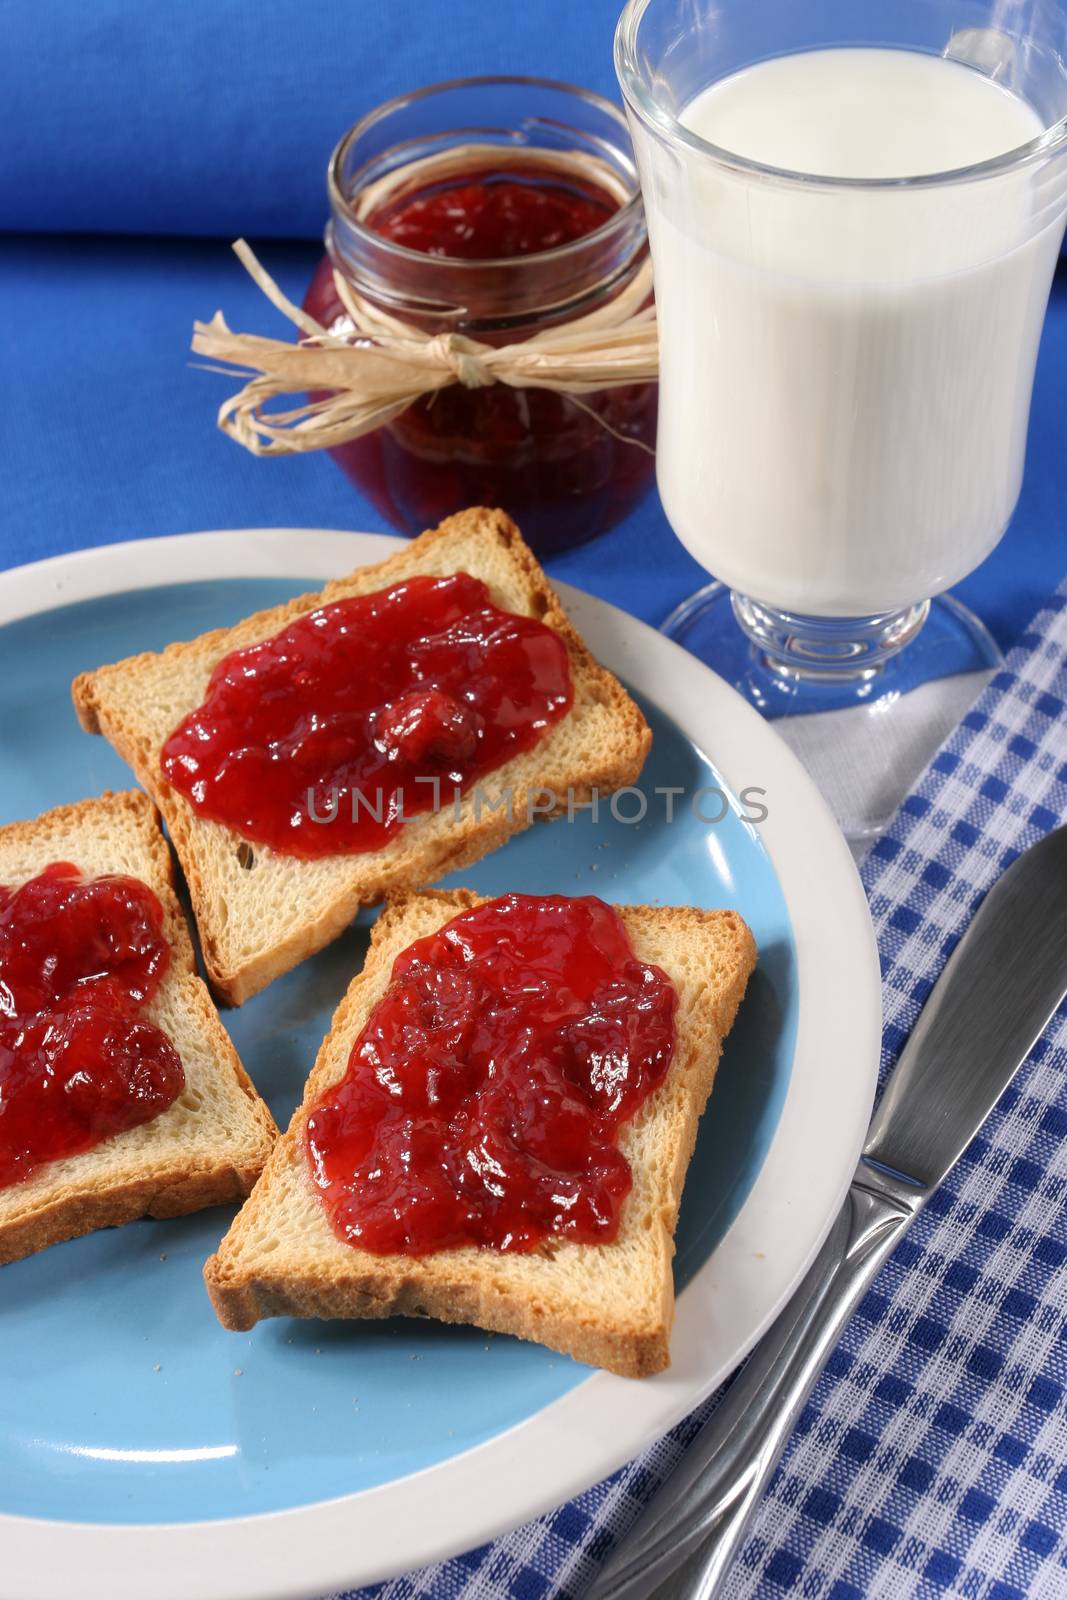 Homemade breakfast, toast with jam, a glass of milk and a jar of jam